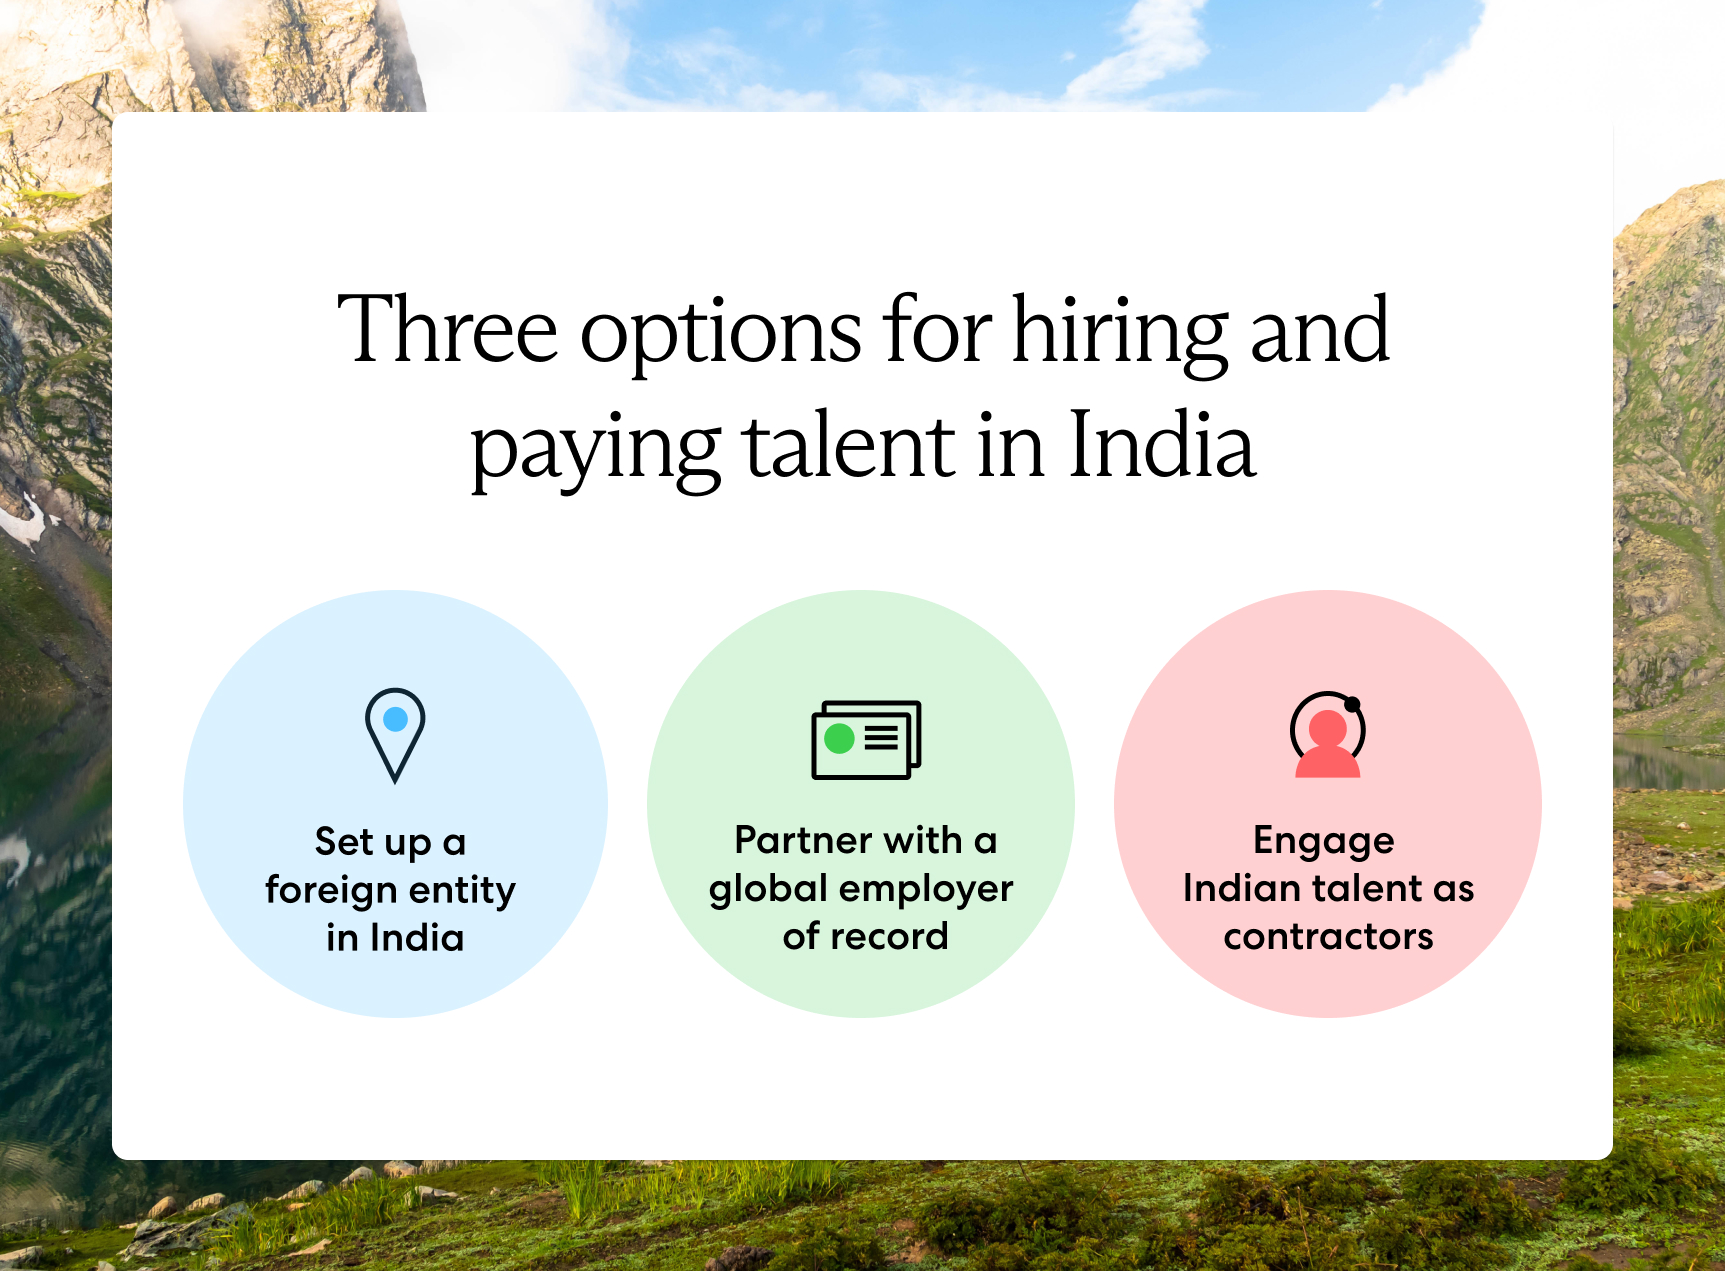 Three options for hiring and paying in India include setting up a foreign entity, working with an EOR, or hiring contractors